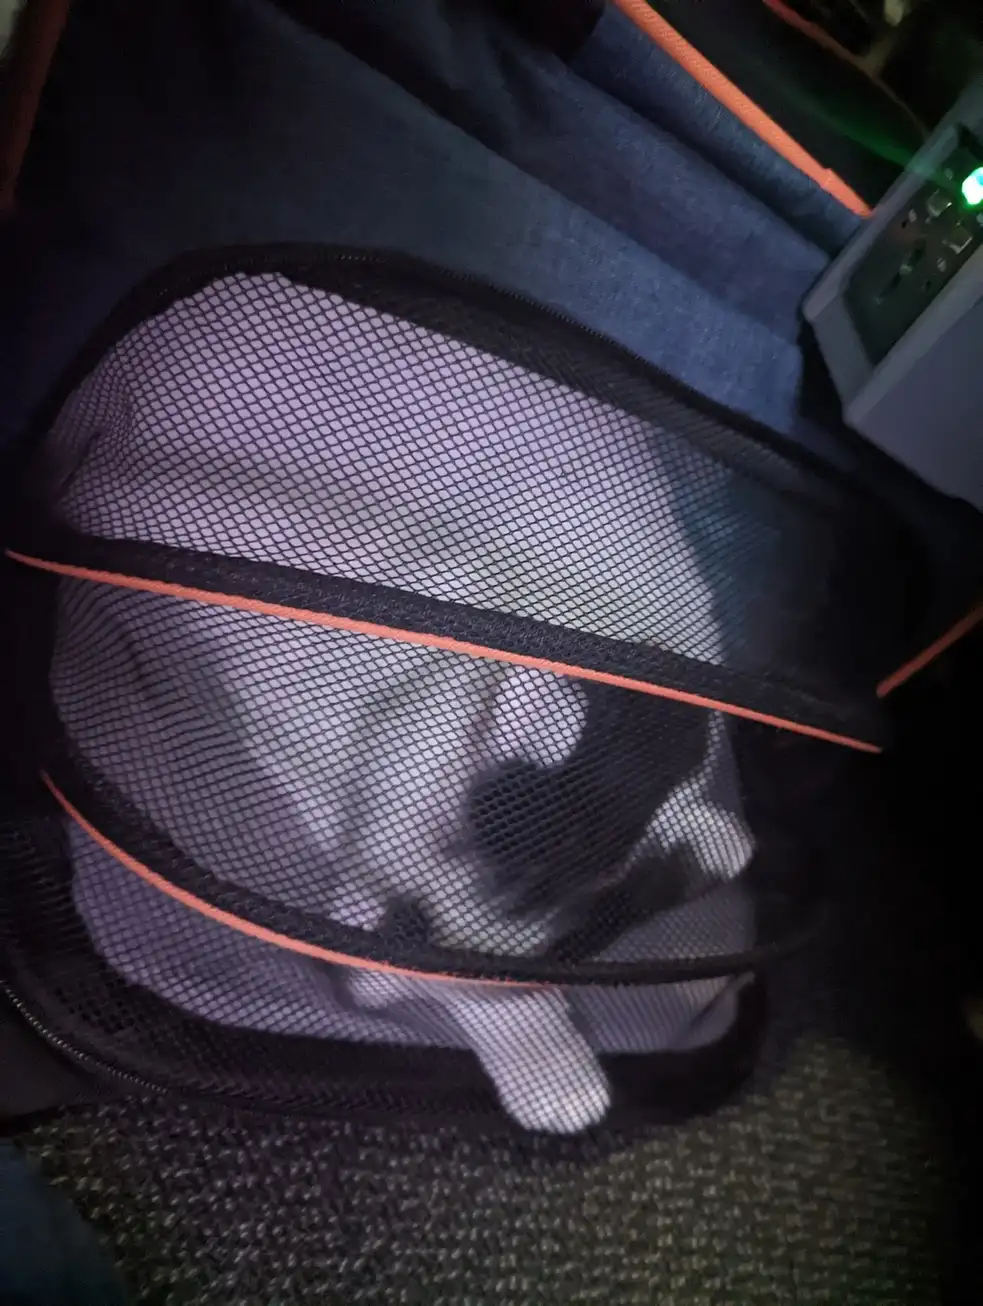 Our cat, on an airplane.